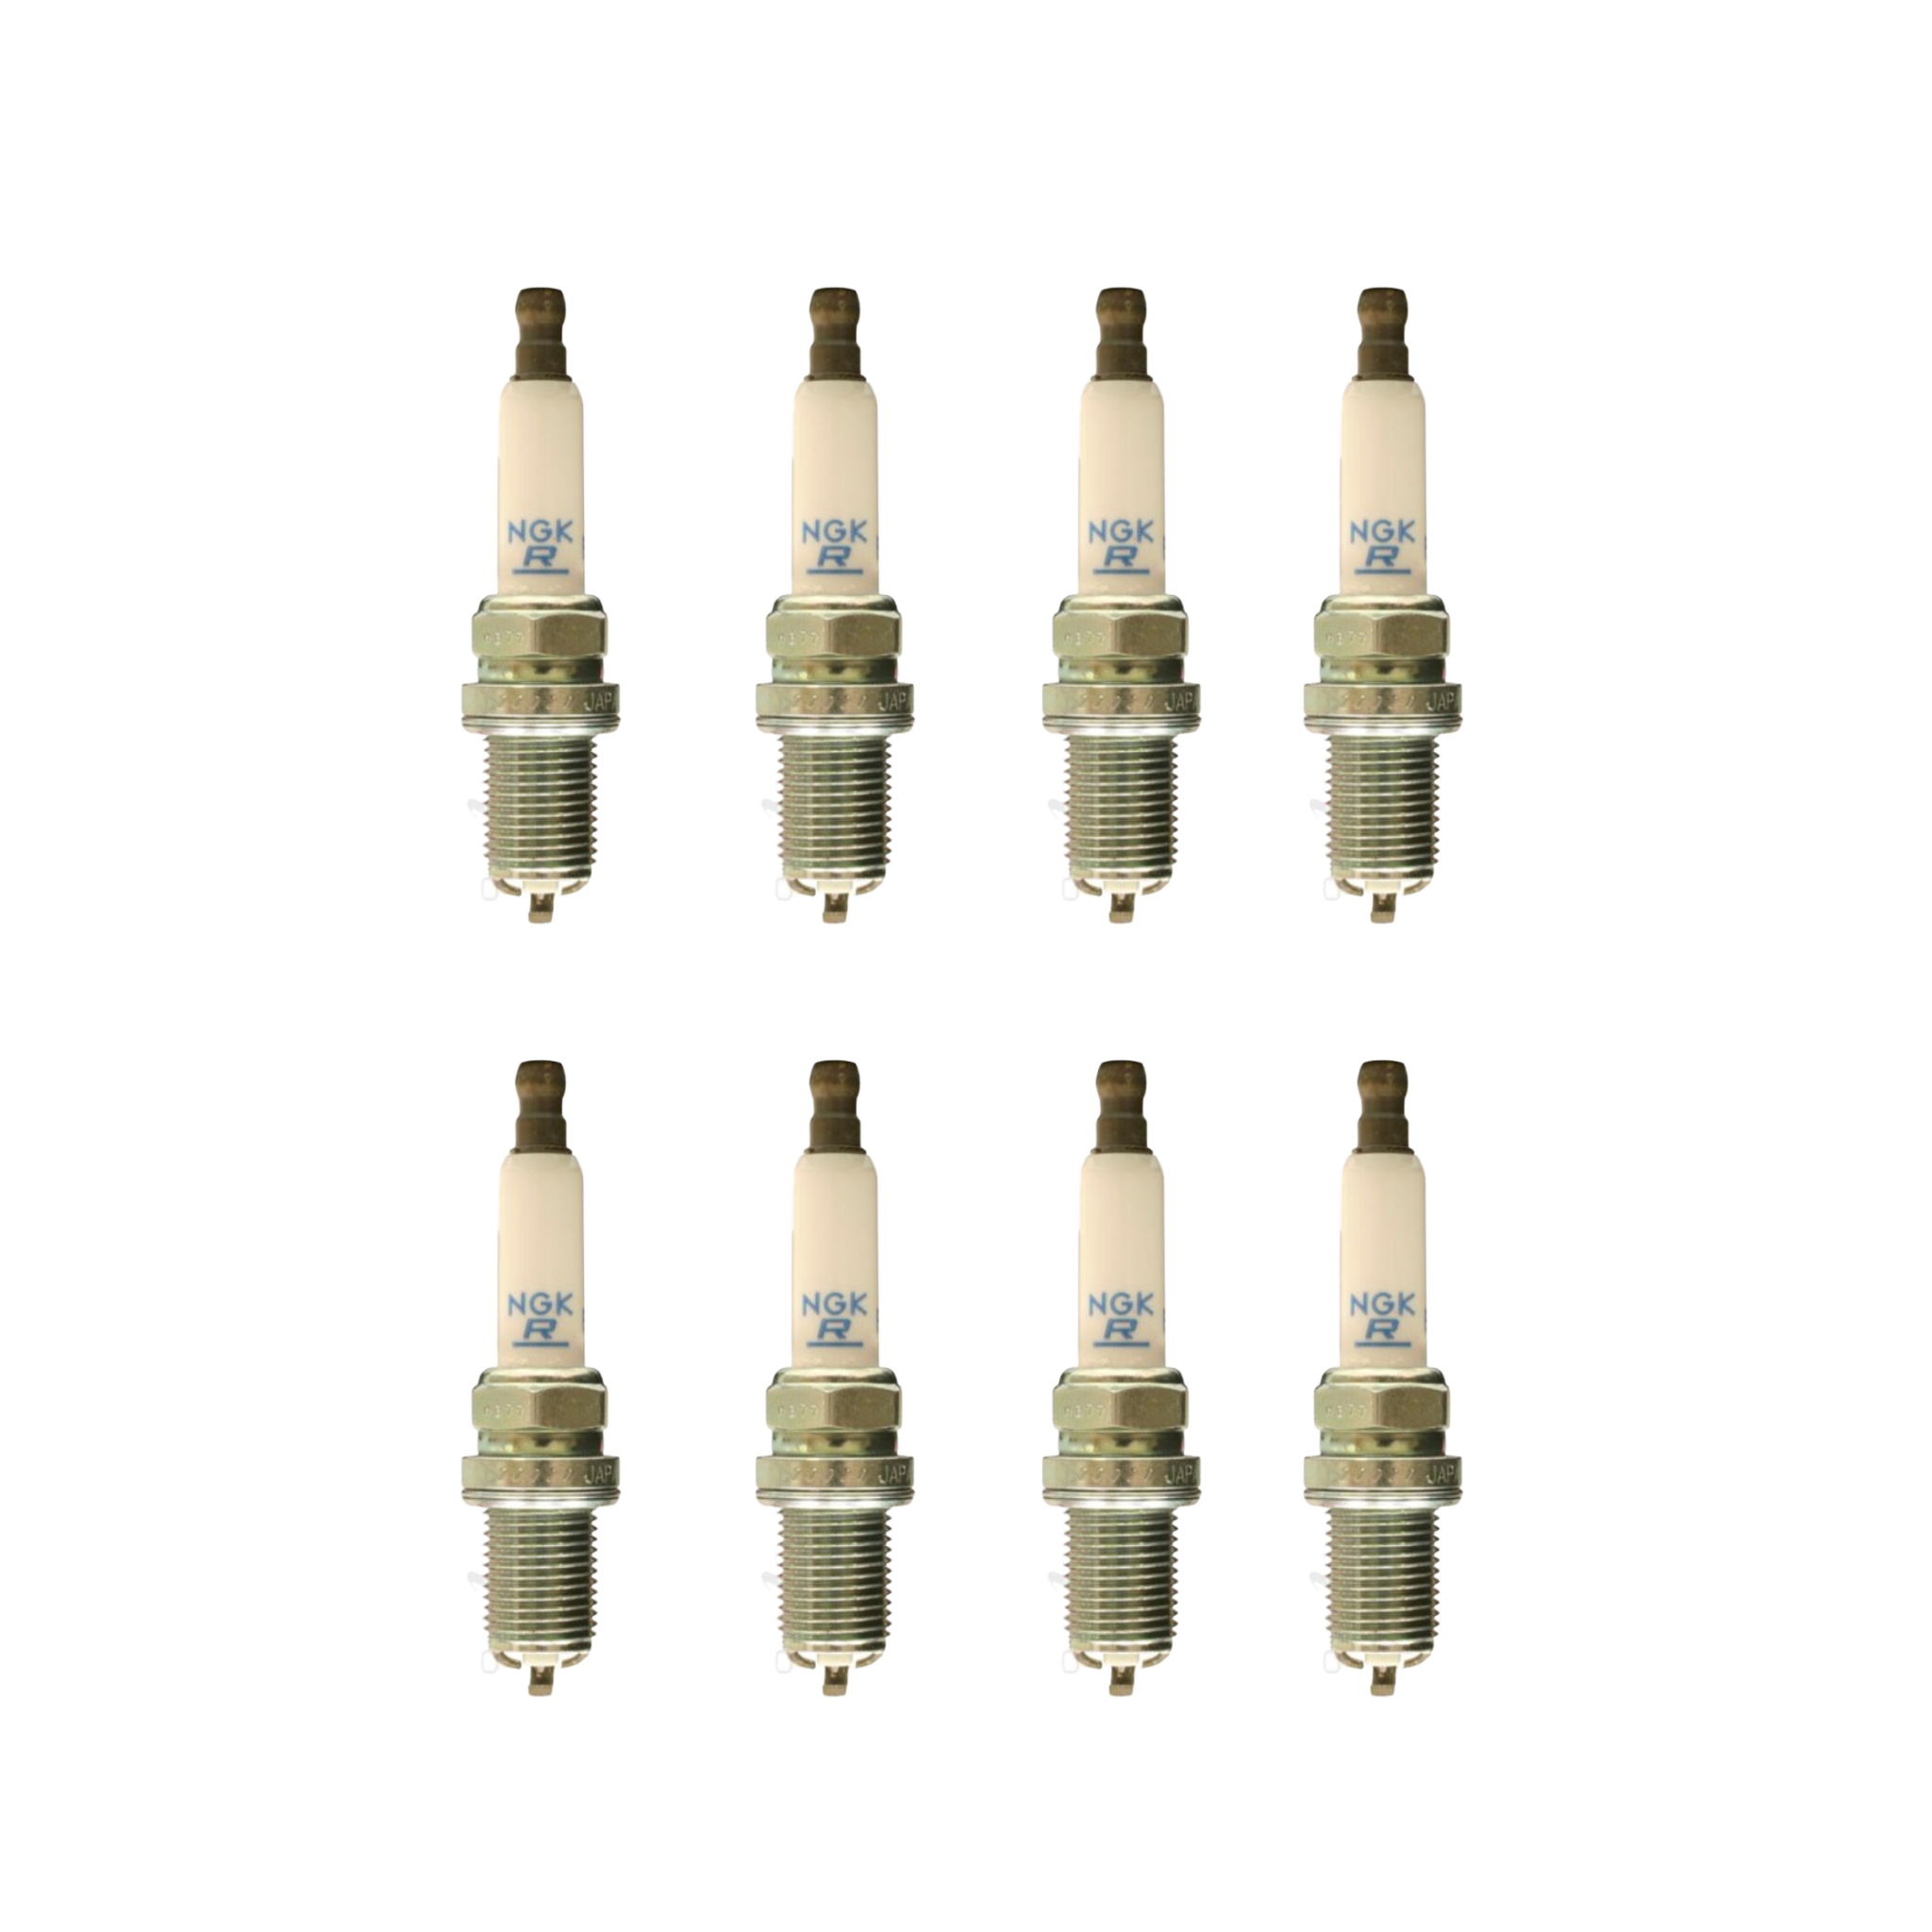 Audi R8/RS4 Spark Plugs Pkt 8 NGK PFR7W-TG